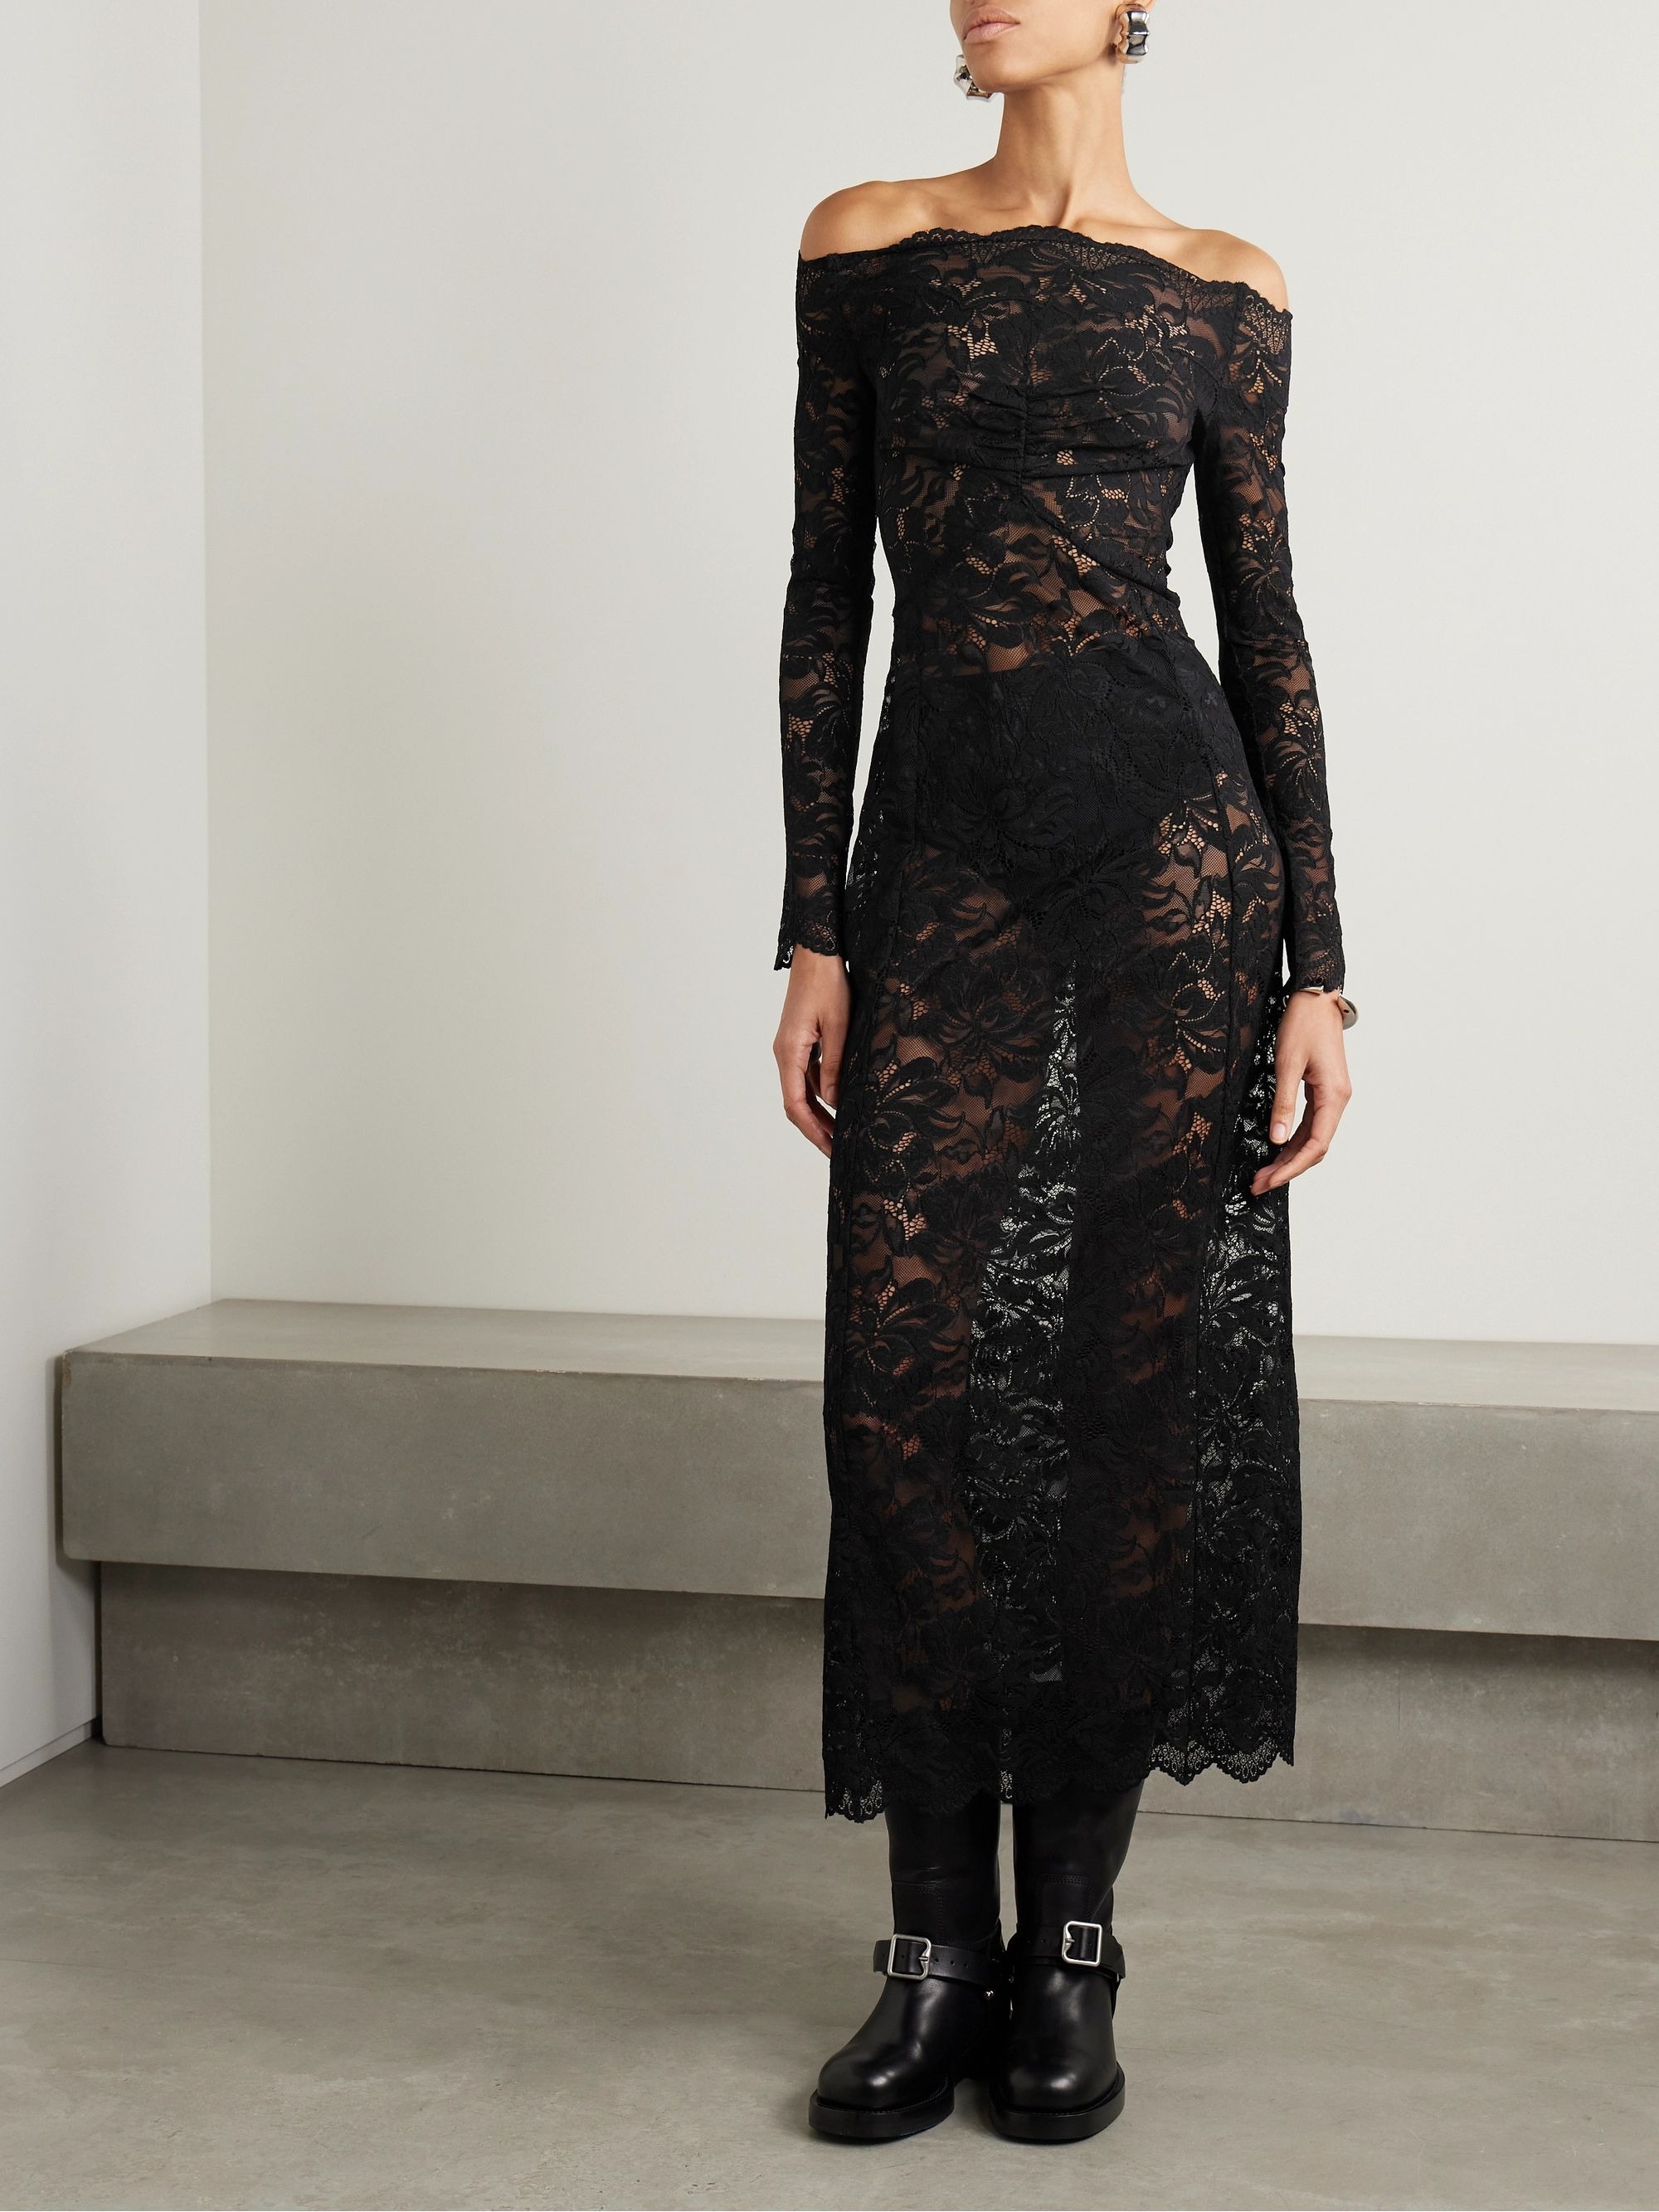 Paco Rabanne + Off-The-Shoulder Scalloped Stretch-Lace Maxi Dress